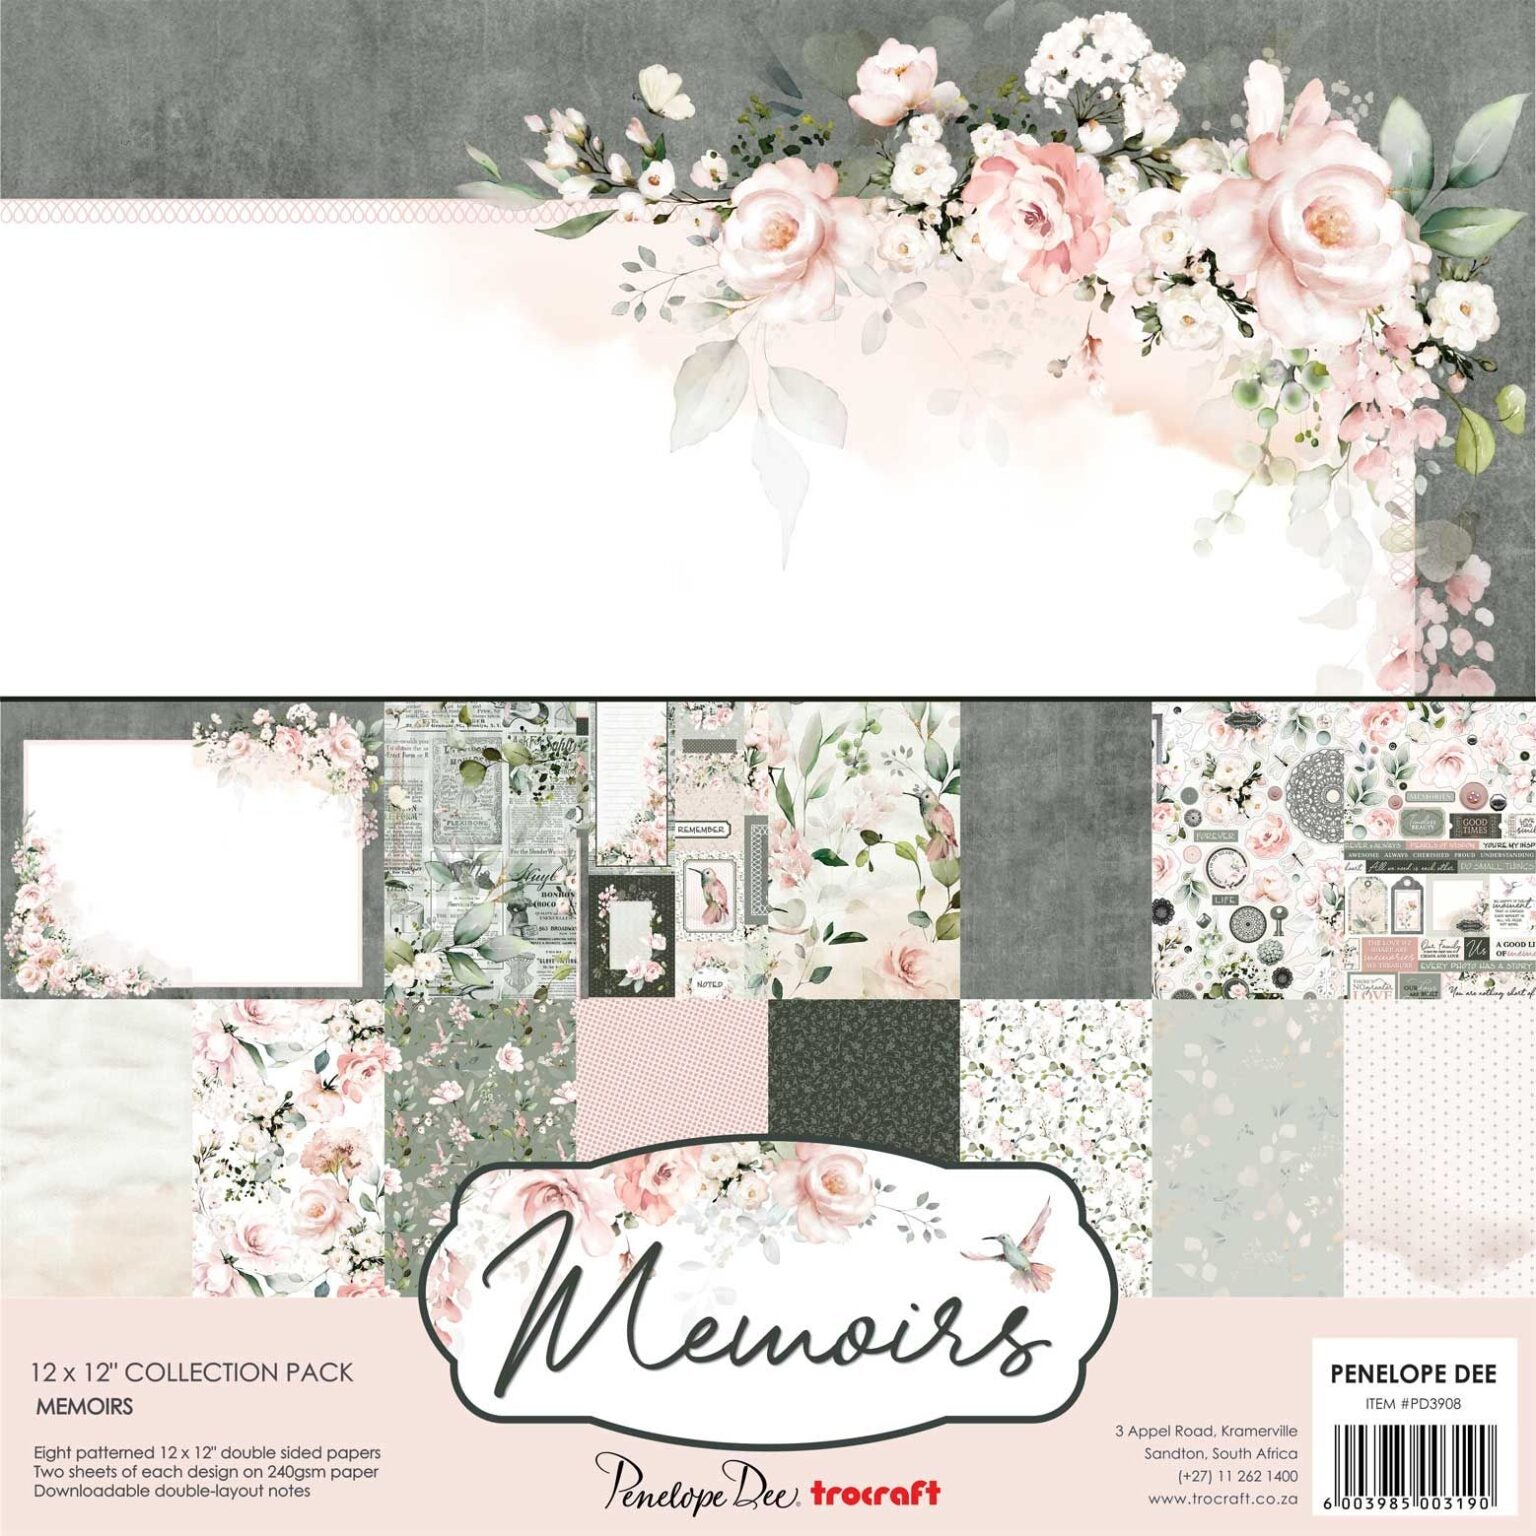 Penelope Dee Chipboard - Memoirs 12 x 12 Collection Pack